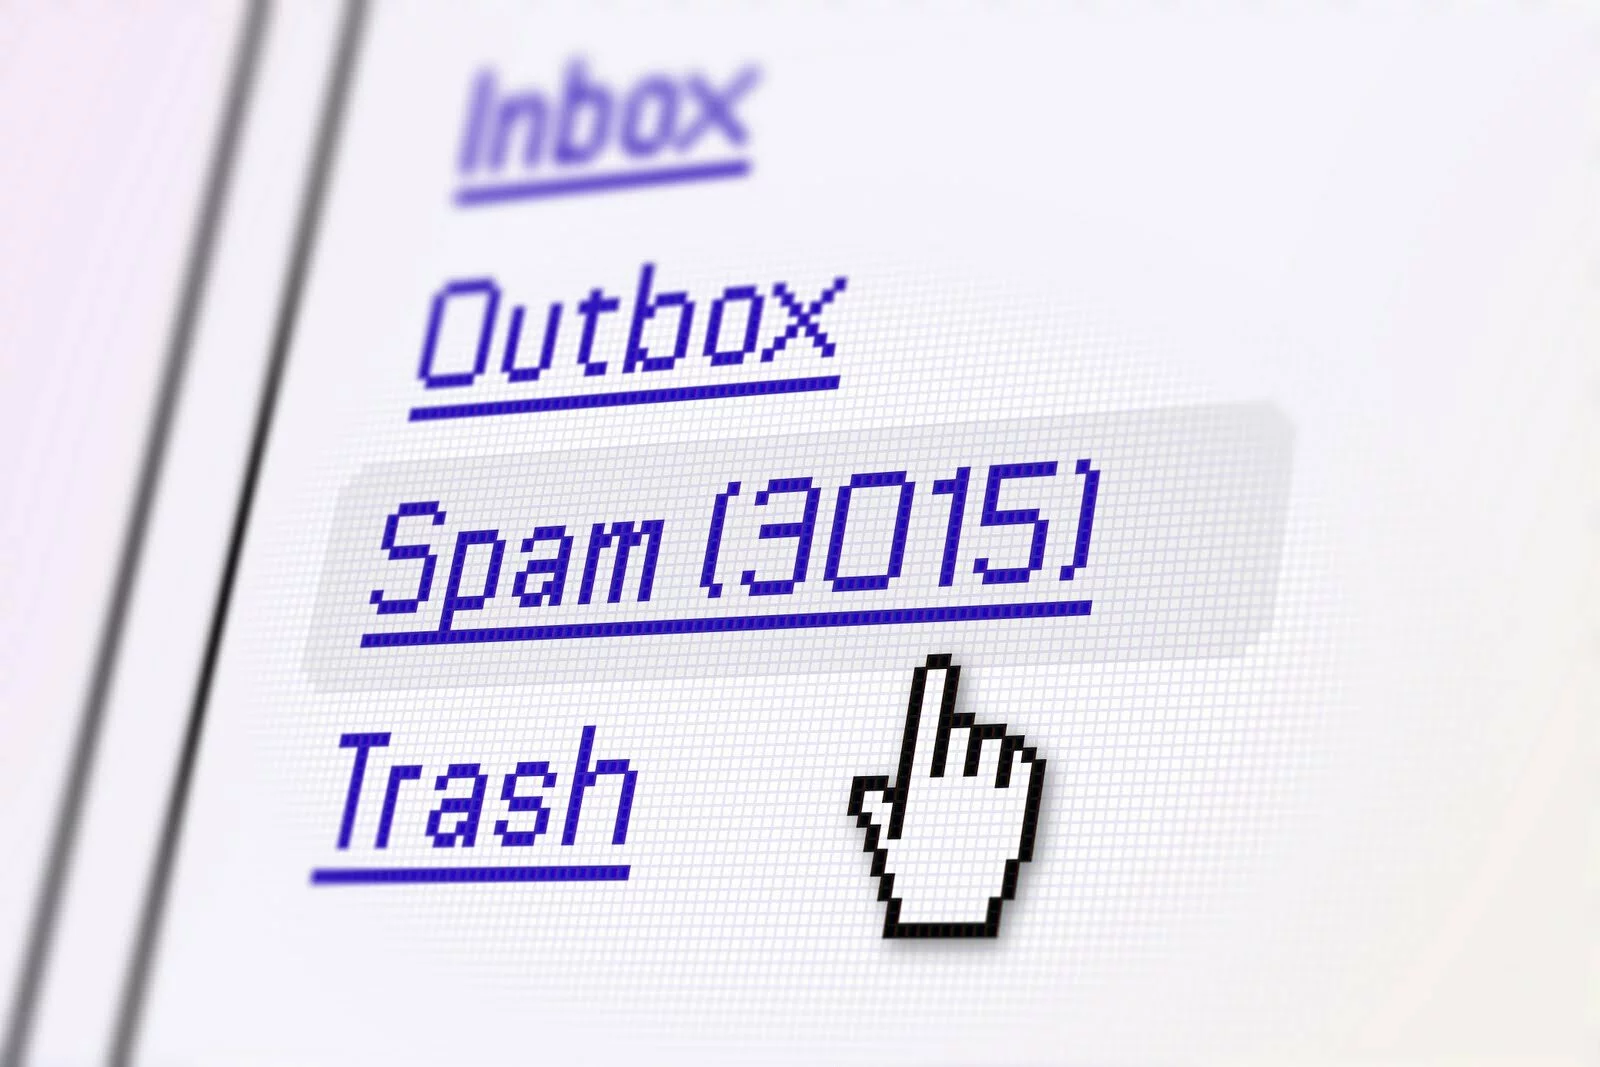 Automatically delete spam in gmail